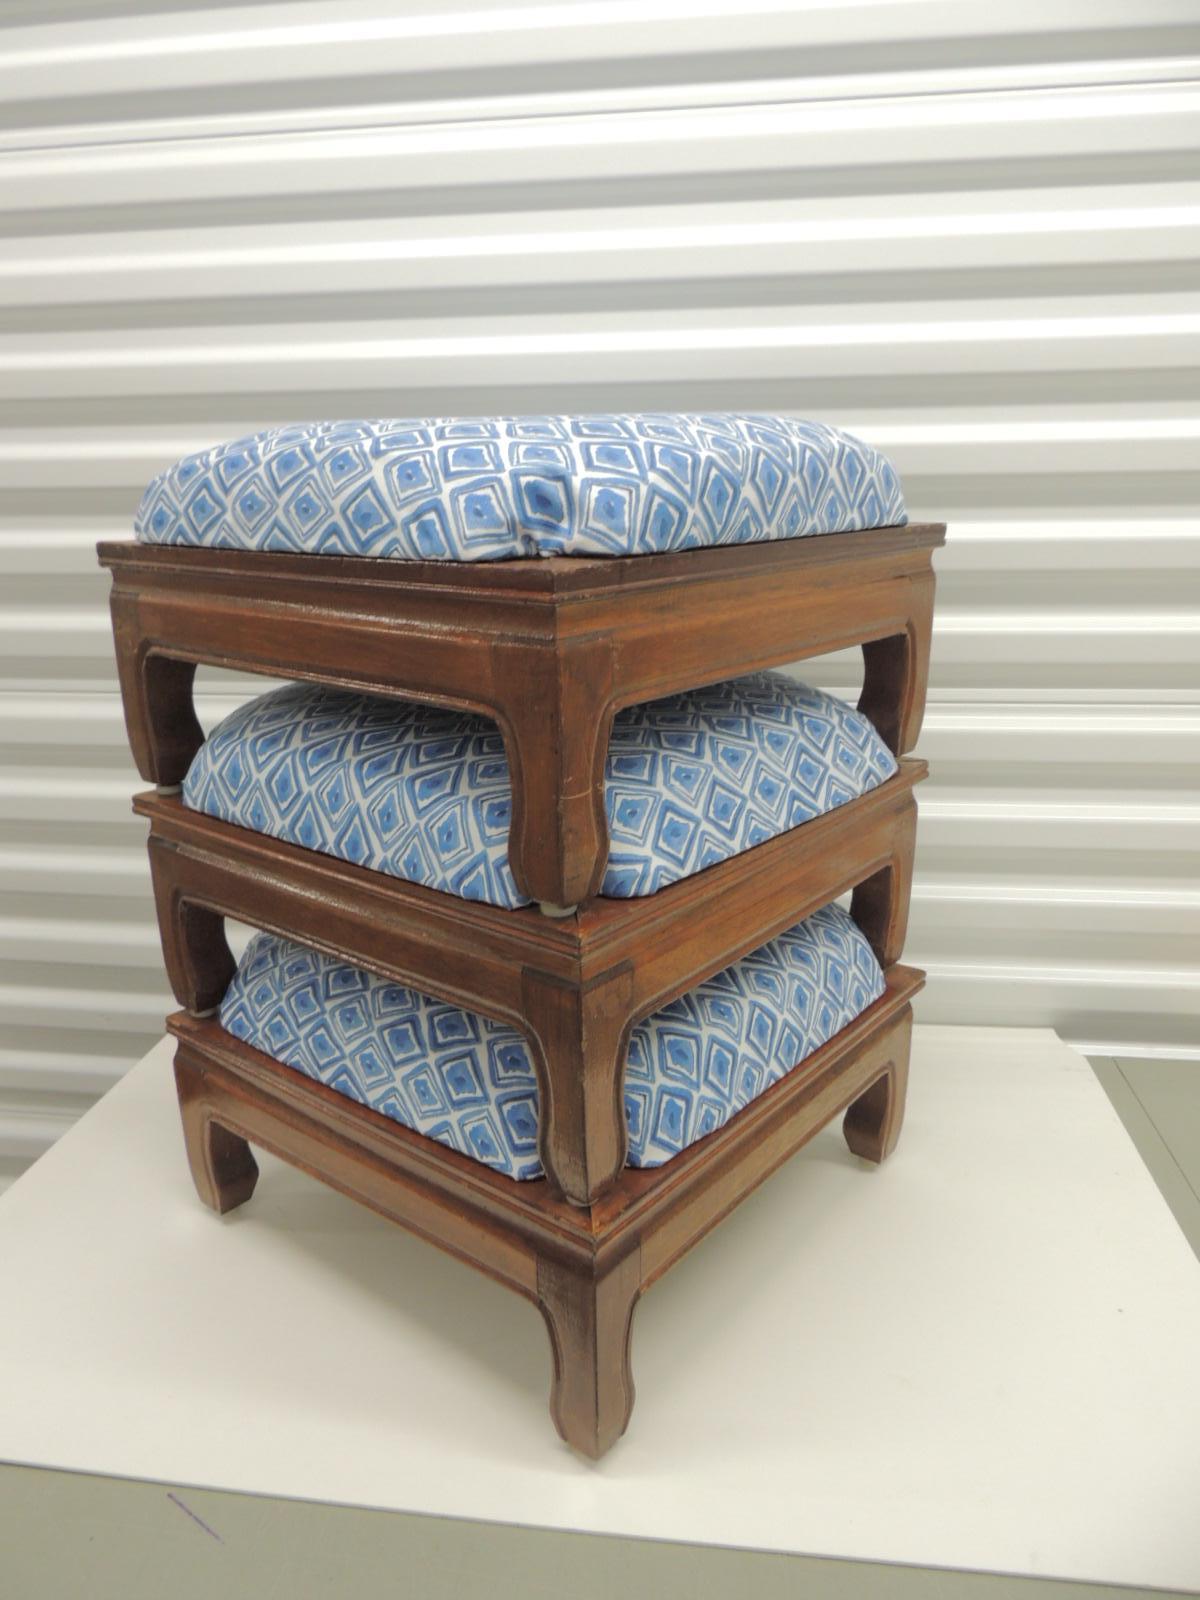 Bohemian Vintage Set of (3) Square Nesting Ottoman/Stools Covered in Blue & White Fabric